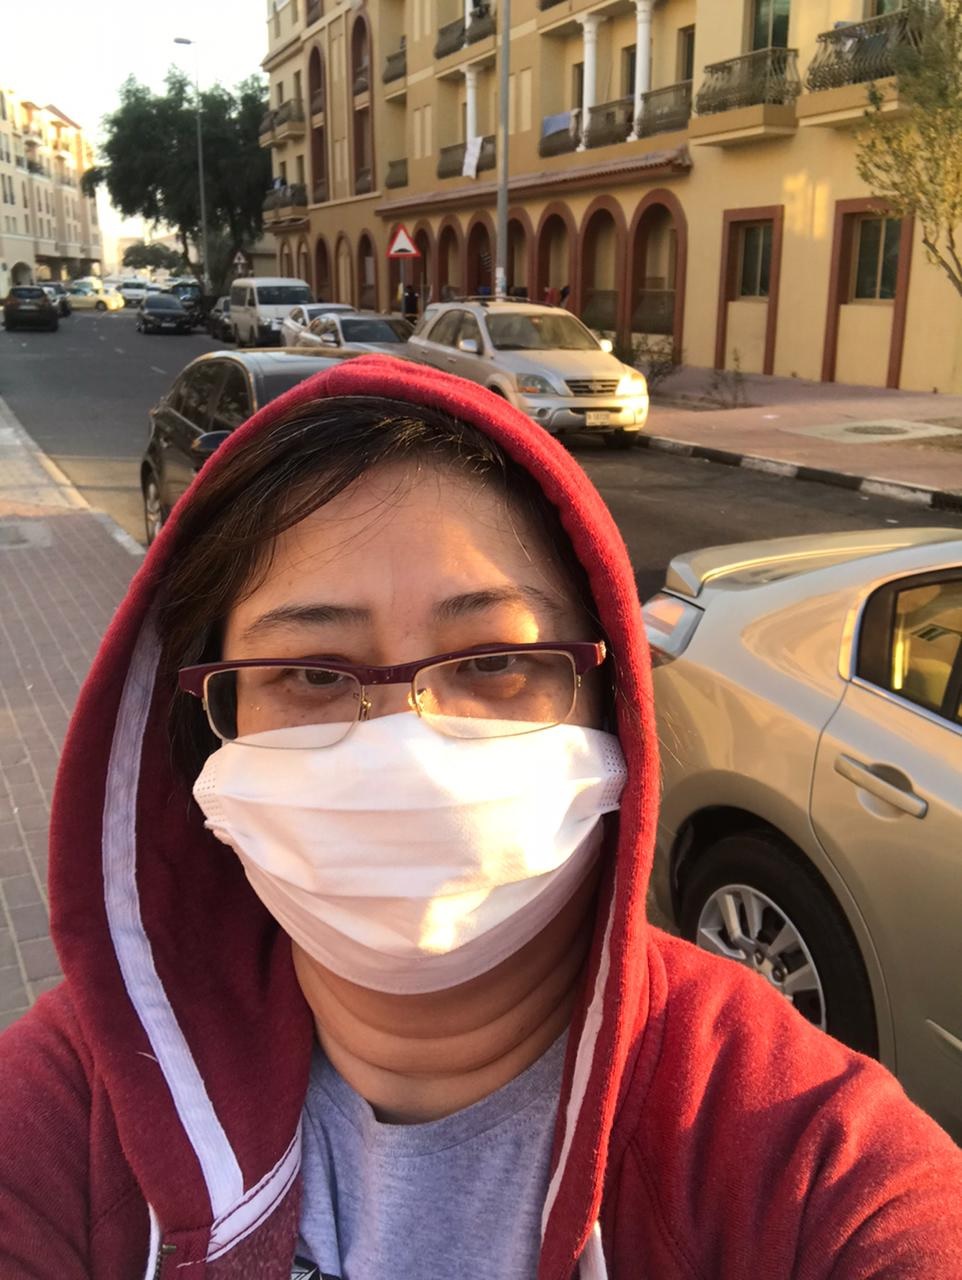 This is me taking a morning walk in front our building. I could walk for 10 15 minutes a few days after my discharge. I would get tired and breathless easily so I took short walks only.